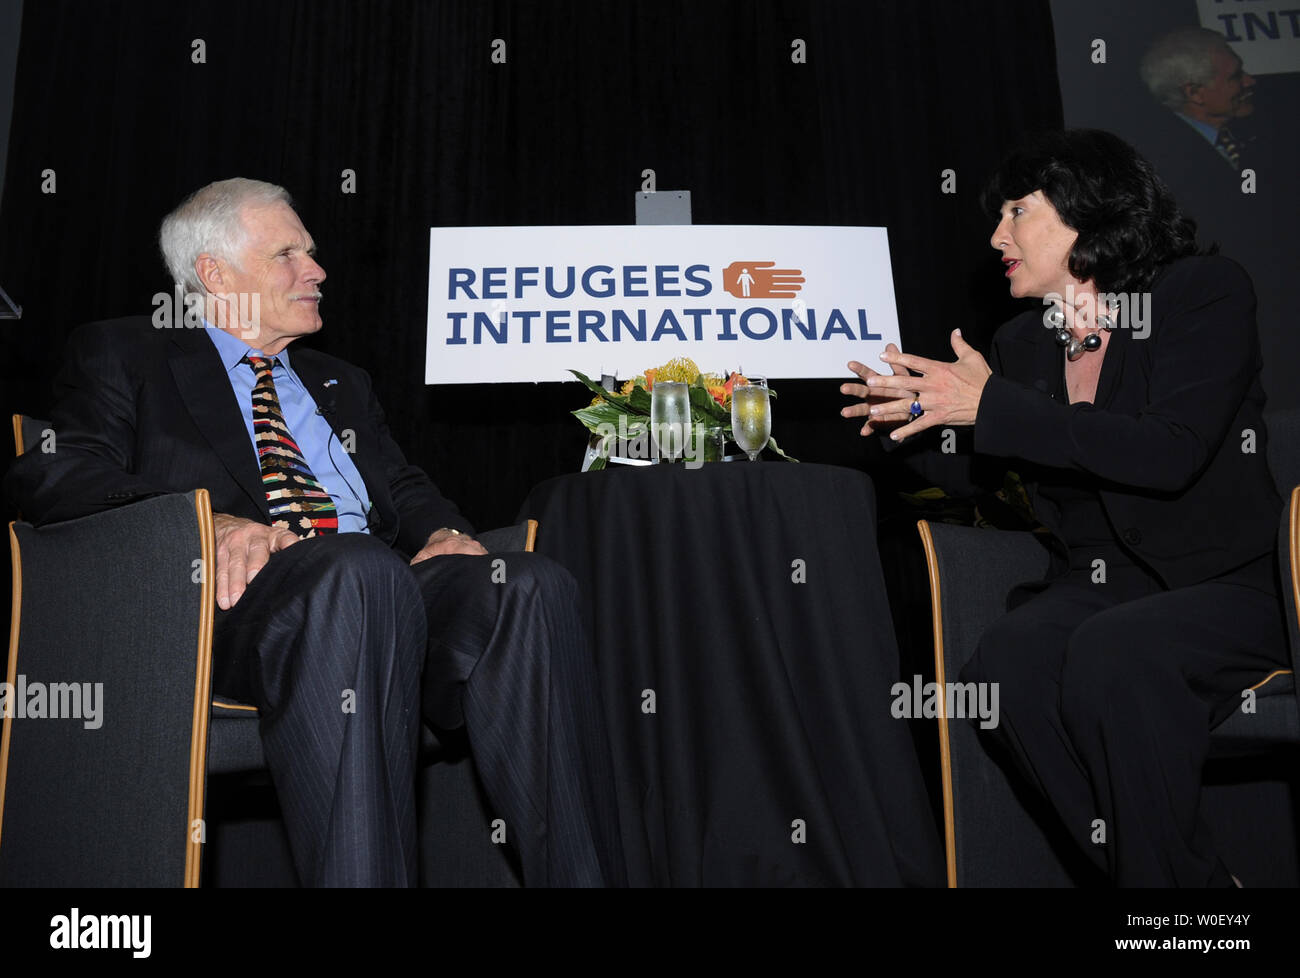 CNN Chief International Correspondent Christiane Amanpour (R) interviews Ted Turner at the 30th Anniversary Refugees International dinner at the Embassy of Italy in Washington on May 7, 2009. The organization is honoring Ted Turner for his contributions to humanitarian issues. (UPI Photo/Alexis C. Glenn) Stock Photo